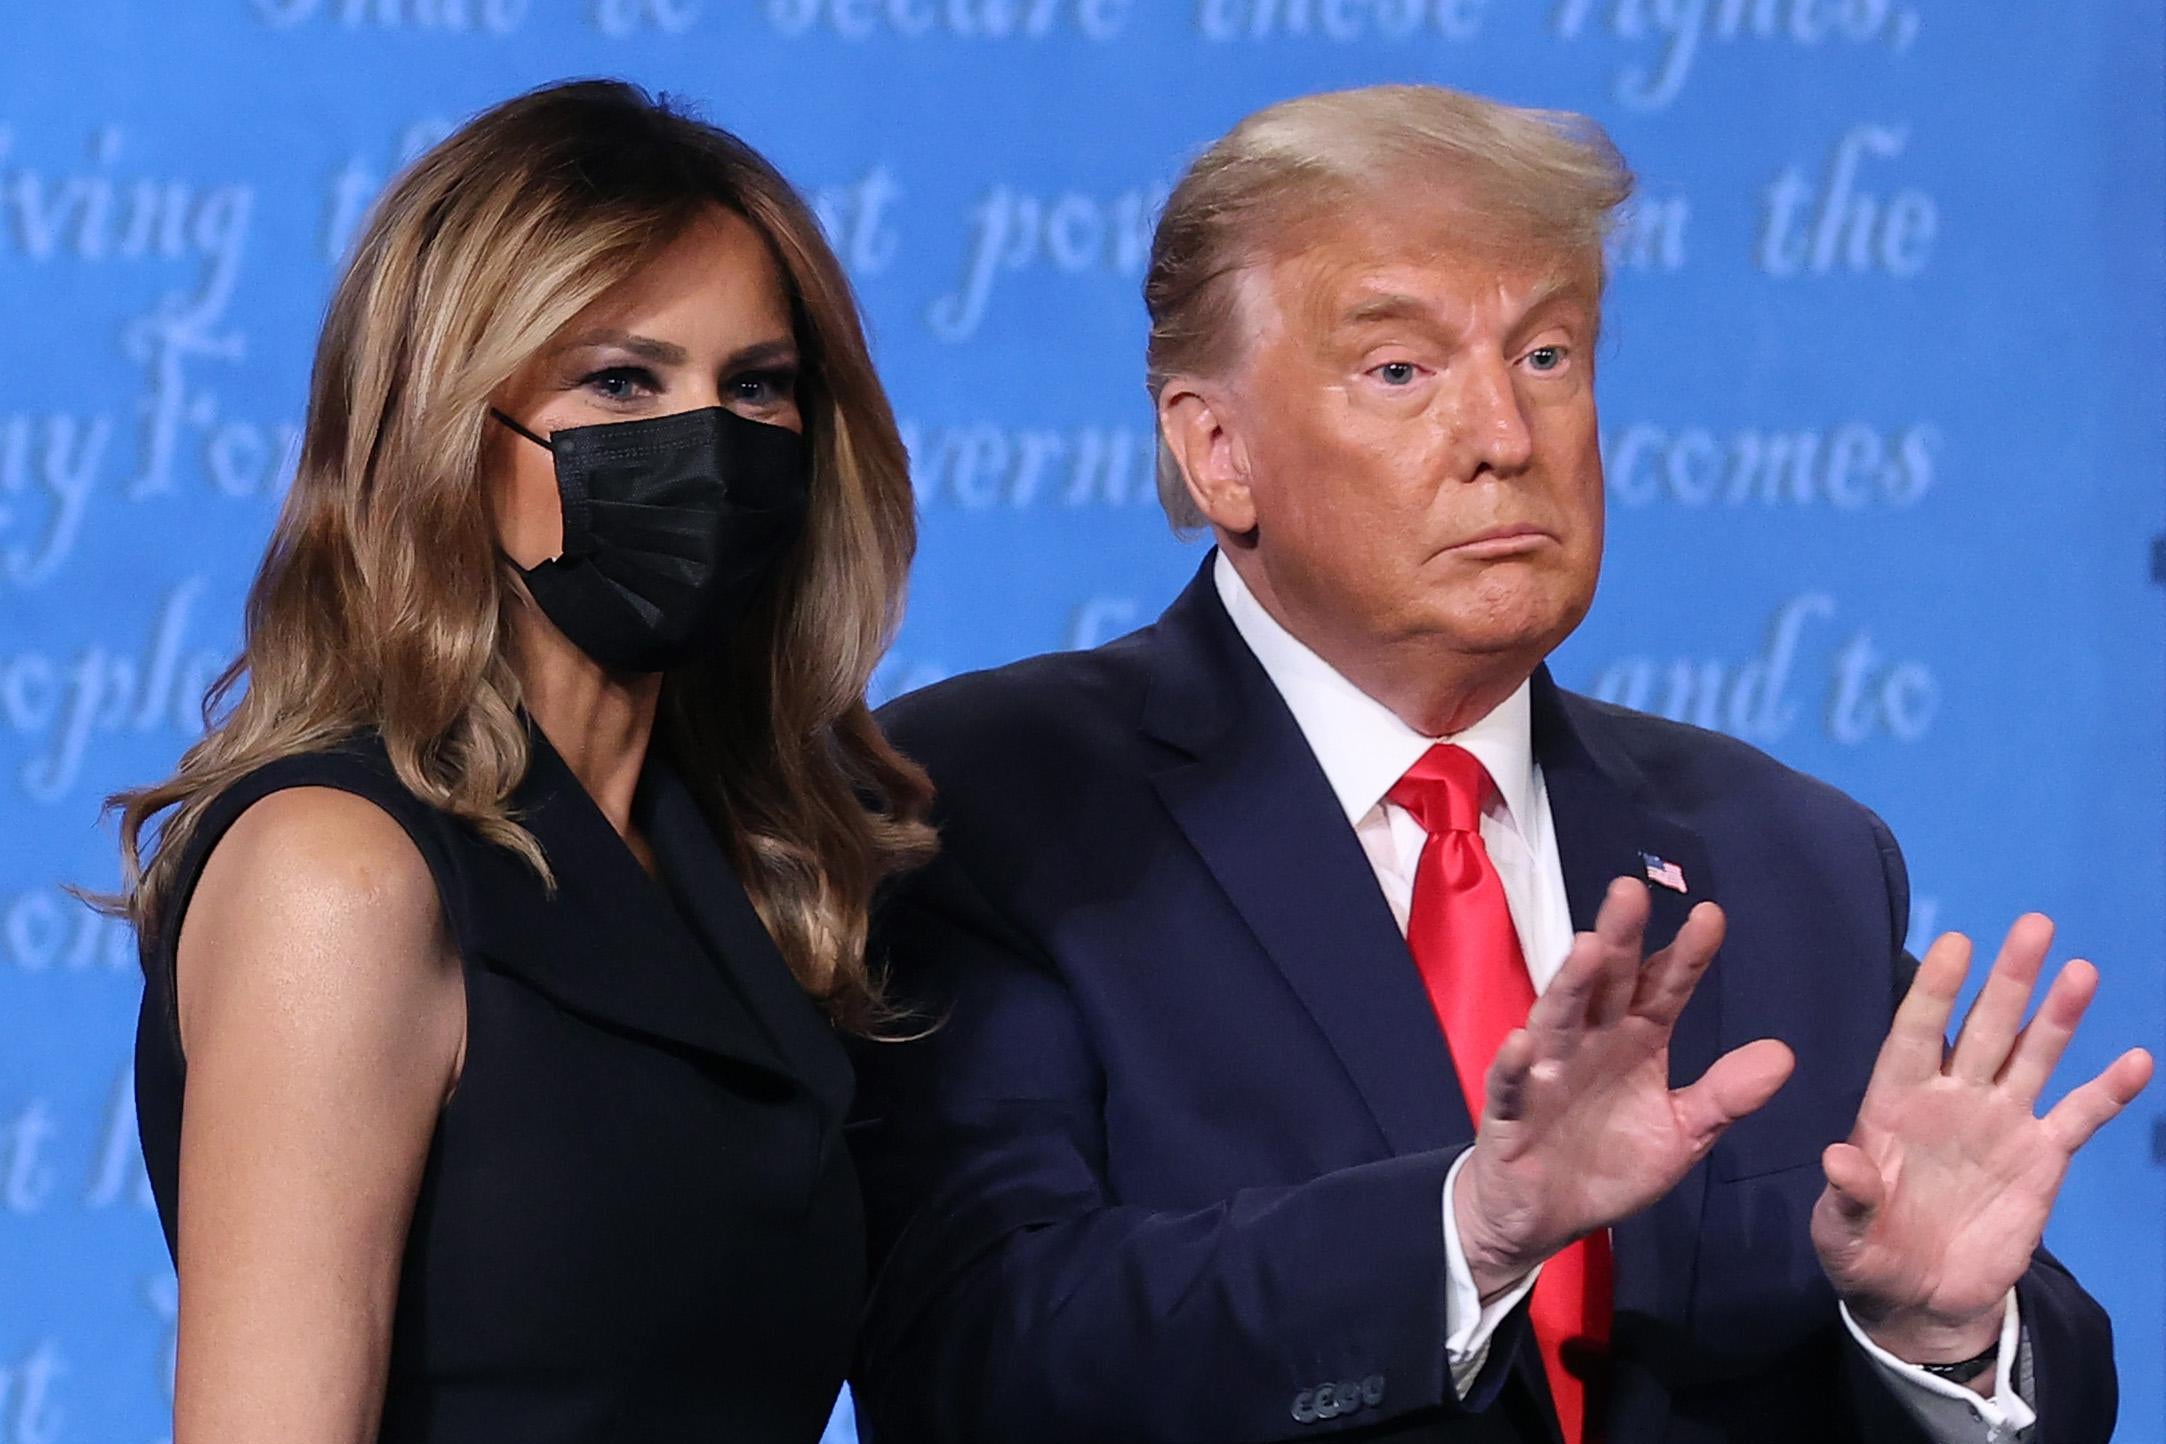 Trump holds up both his hands while standing next to Melania, who's wearing a mask, on the debate stage following the final presidential debate.